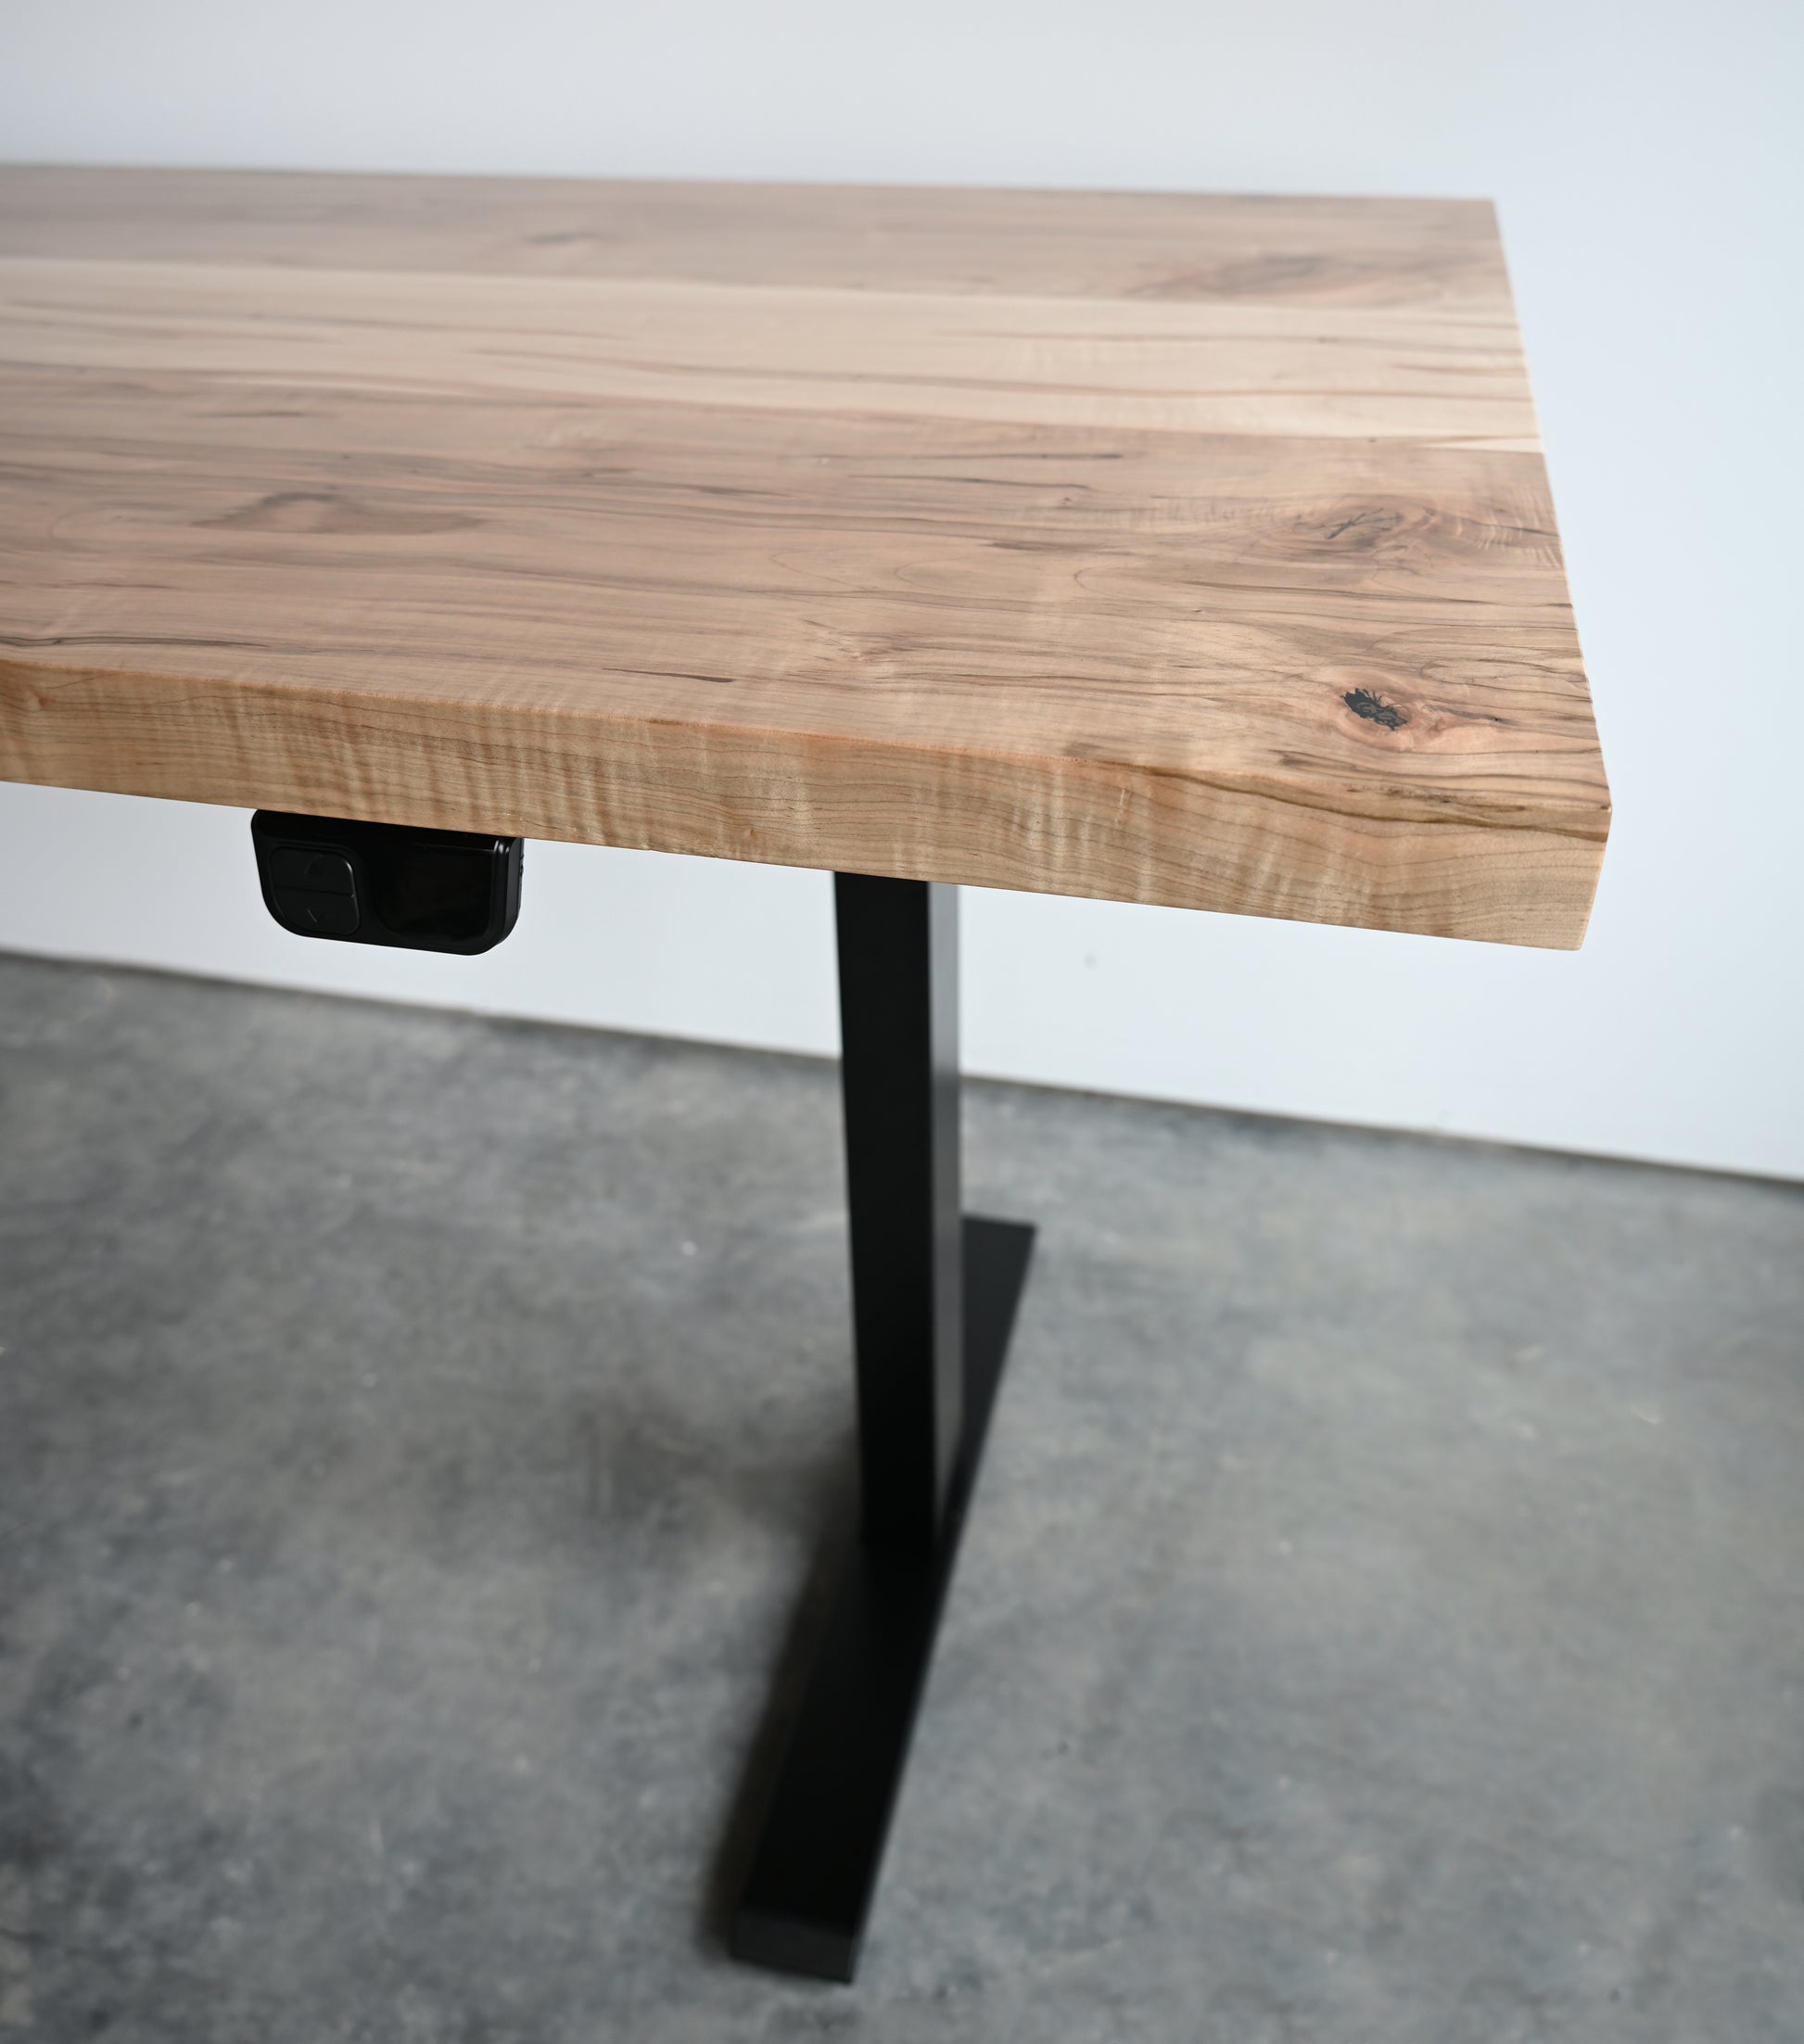 Close up view of wooden top on standing desk